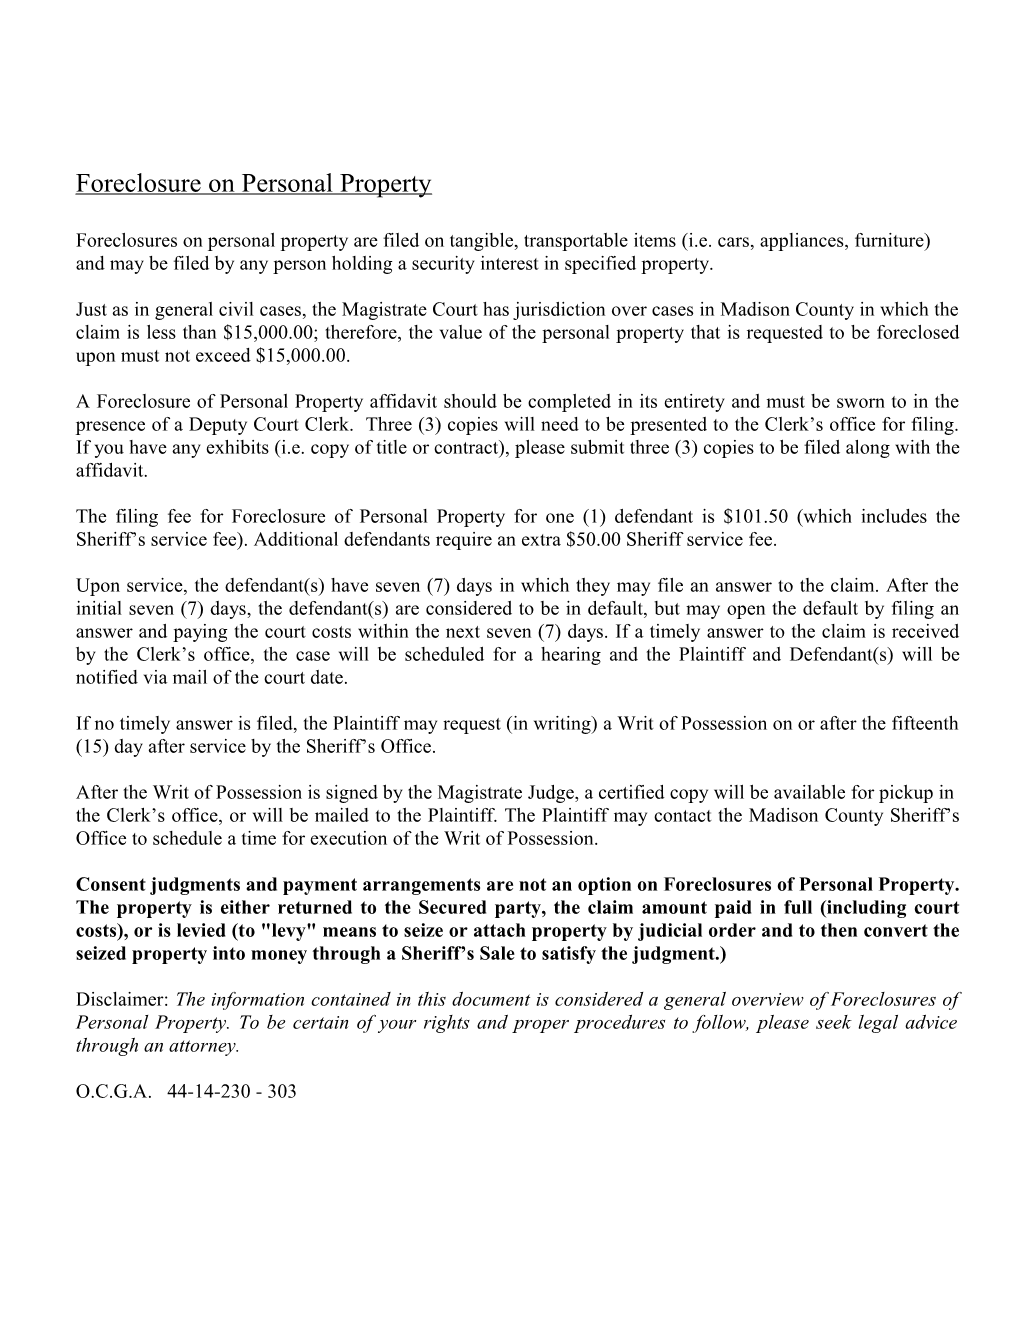 Foreclosure on Personal Property